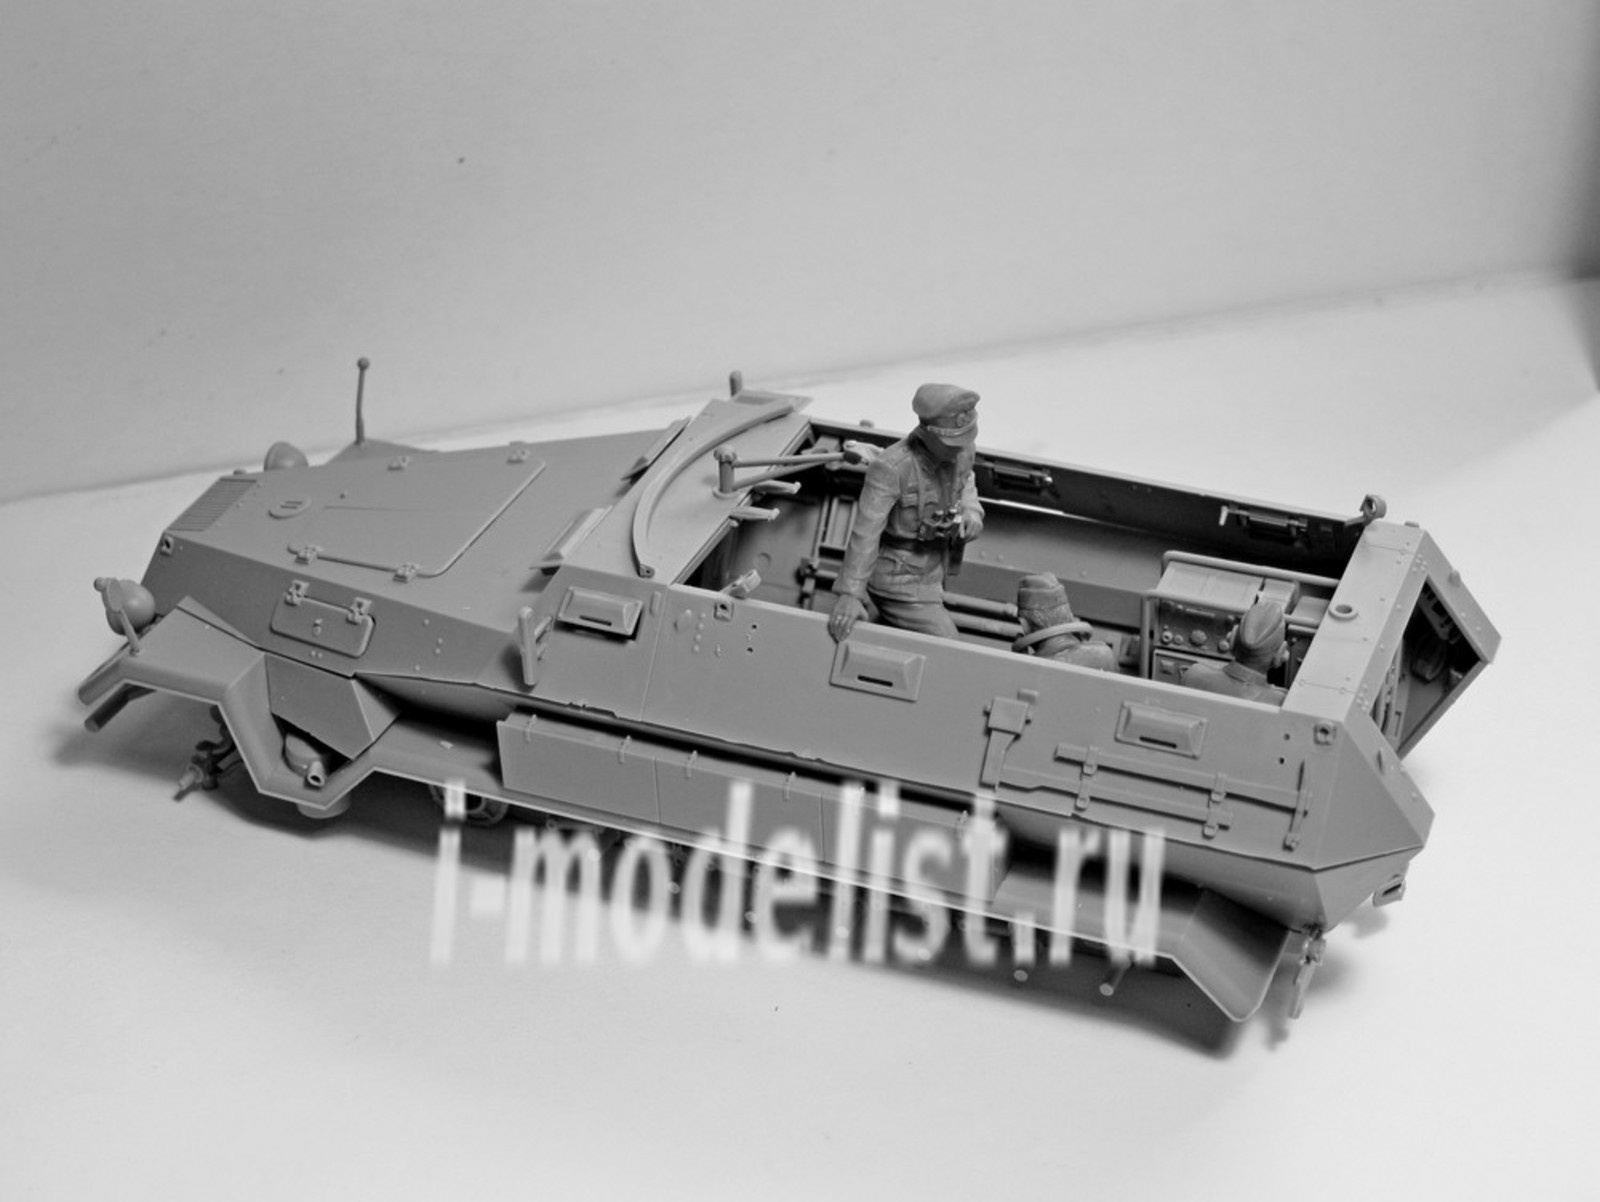 35104 ICM 1/35 Sd.Kfz.251/6 Ausf.A with Crew